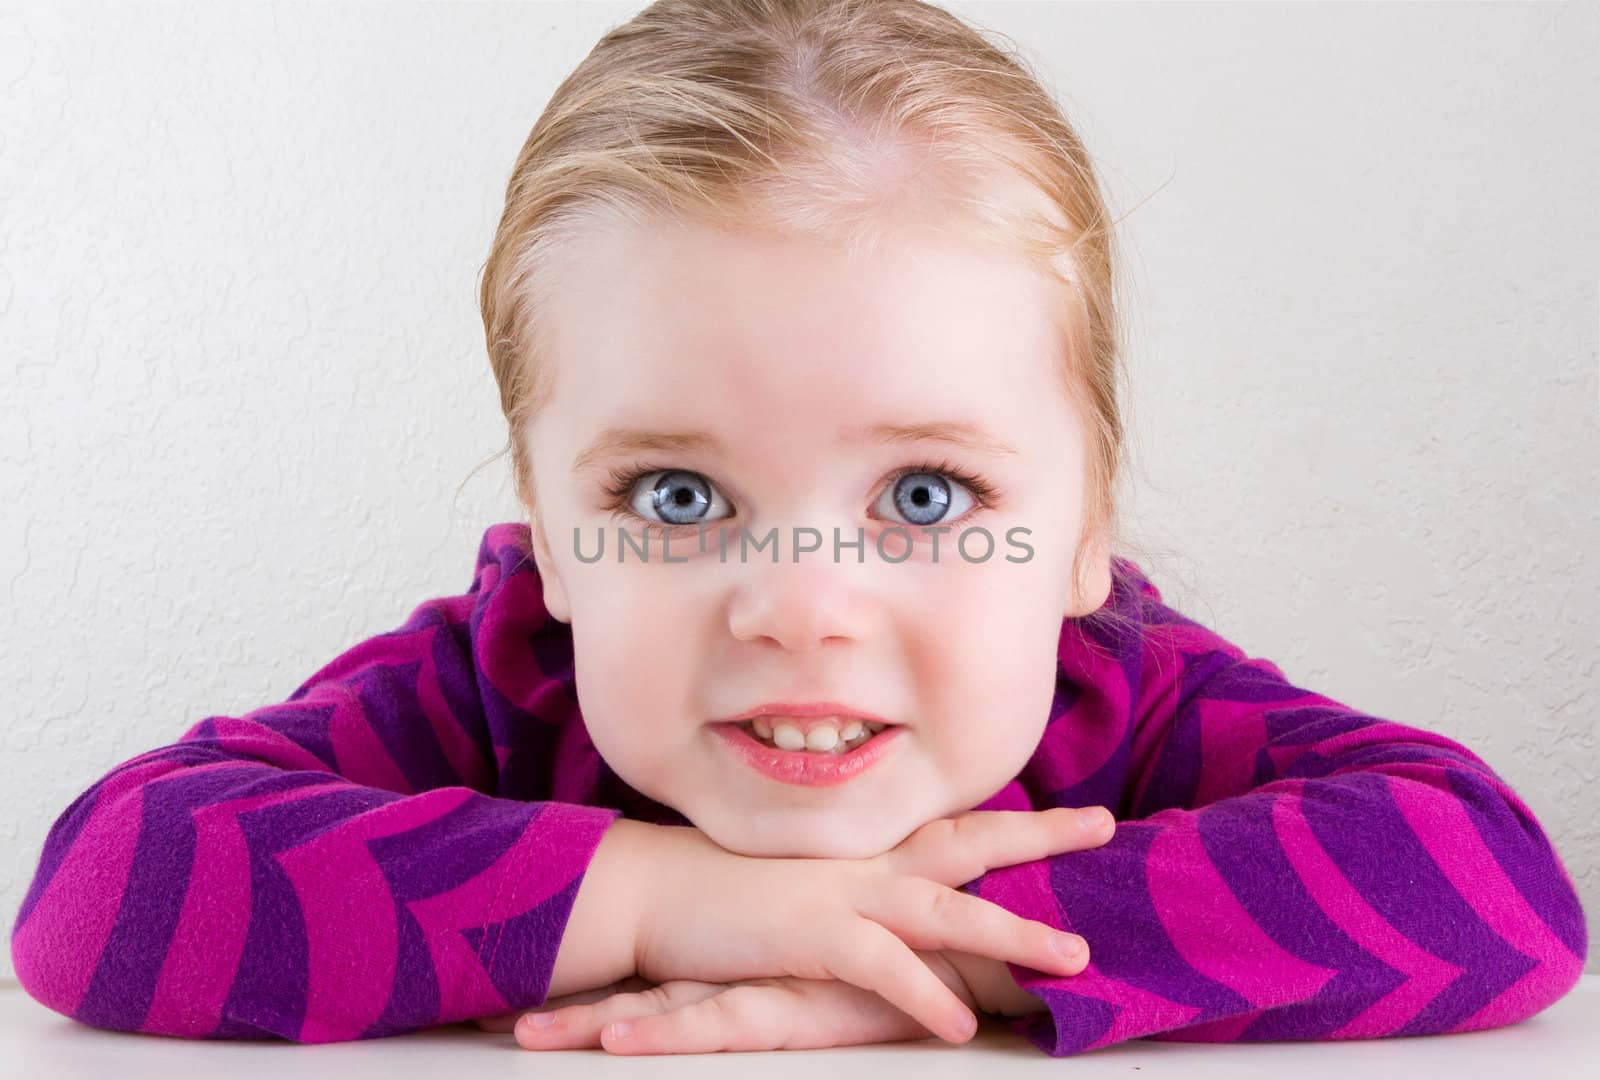 Single child with big bright eyes smiling straight at the camera